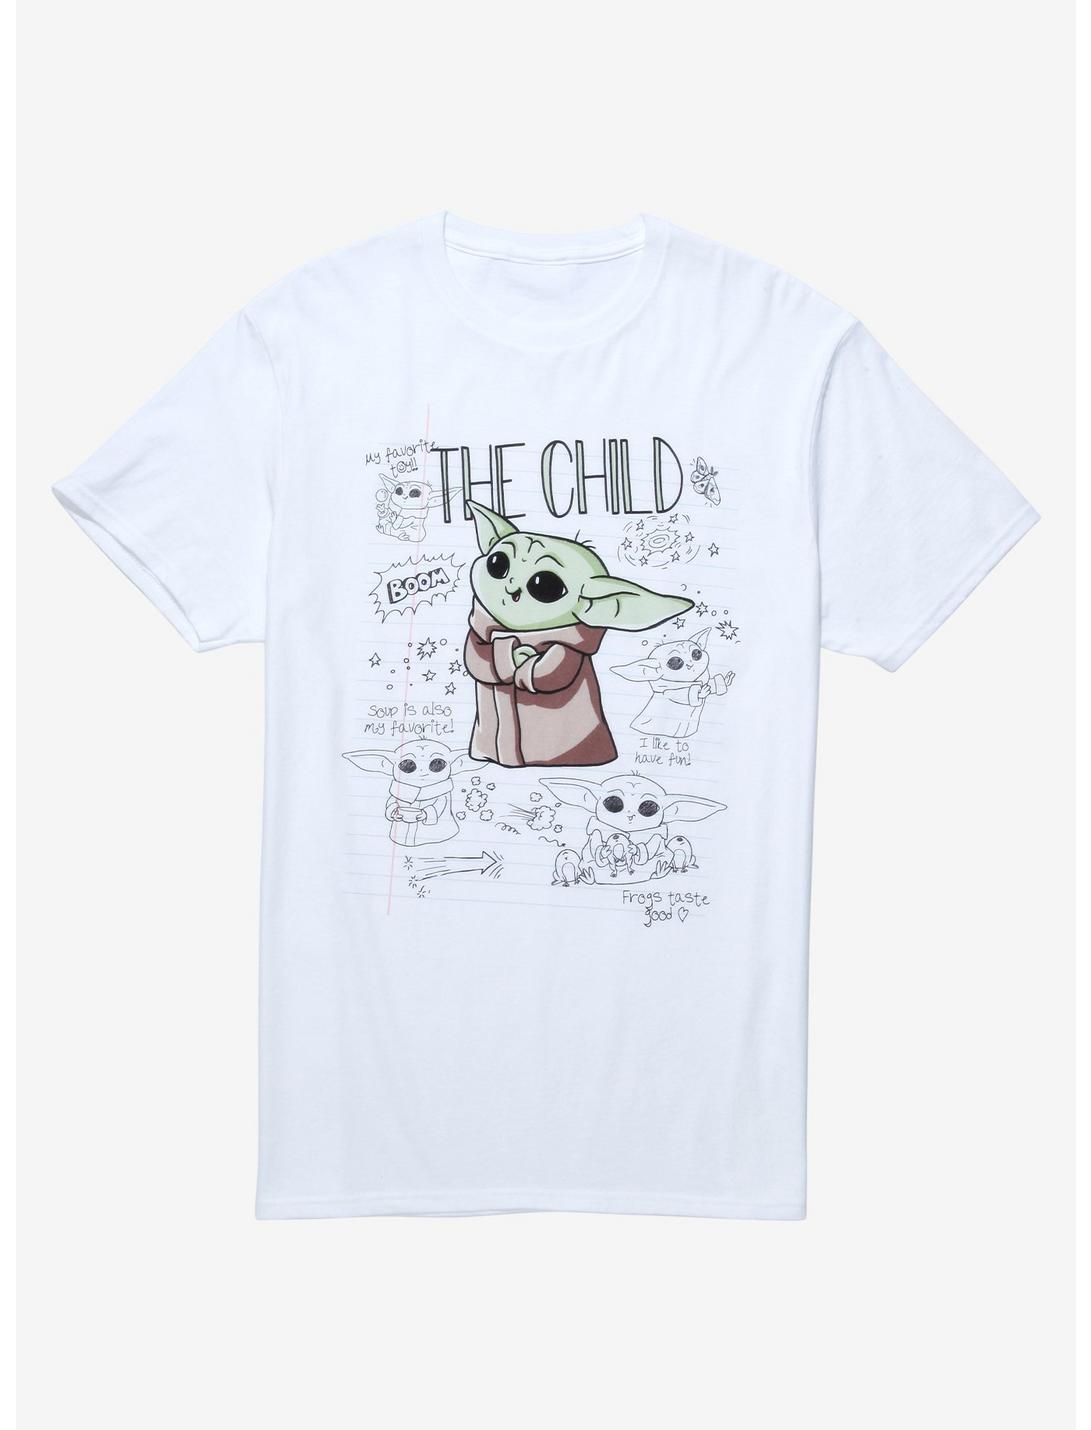 Star Wars The Mandalorian The Child Sketch T-Shirt - BoxLunch Exclusive, WHITE, hi-res